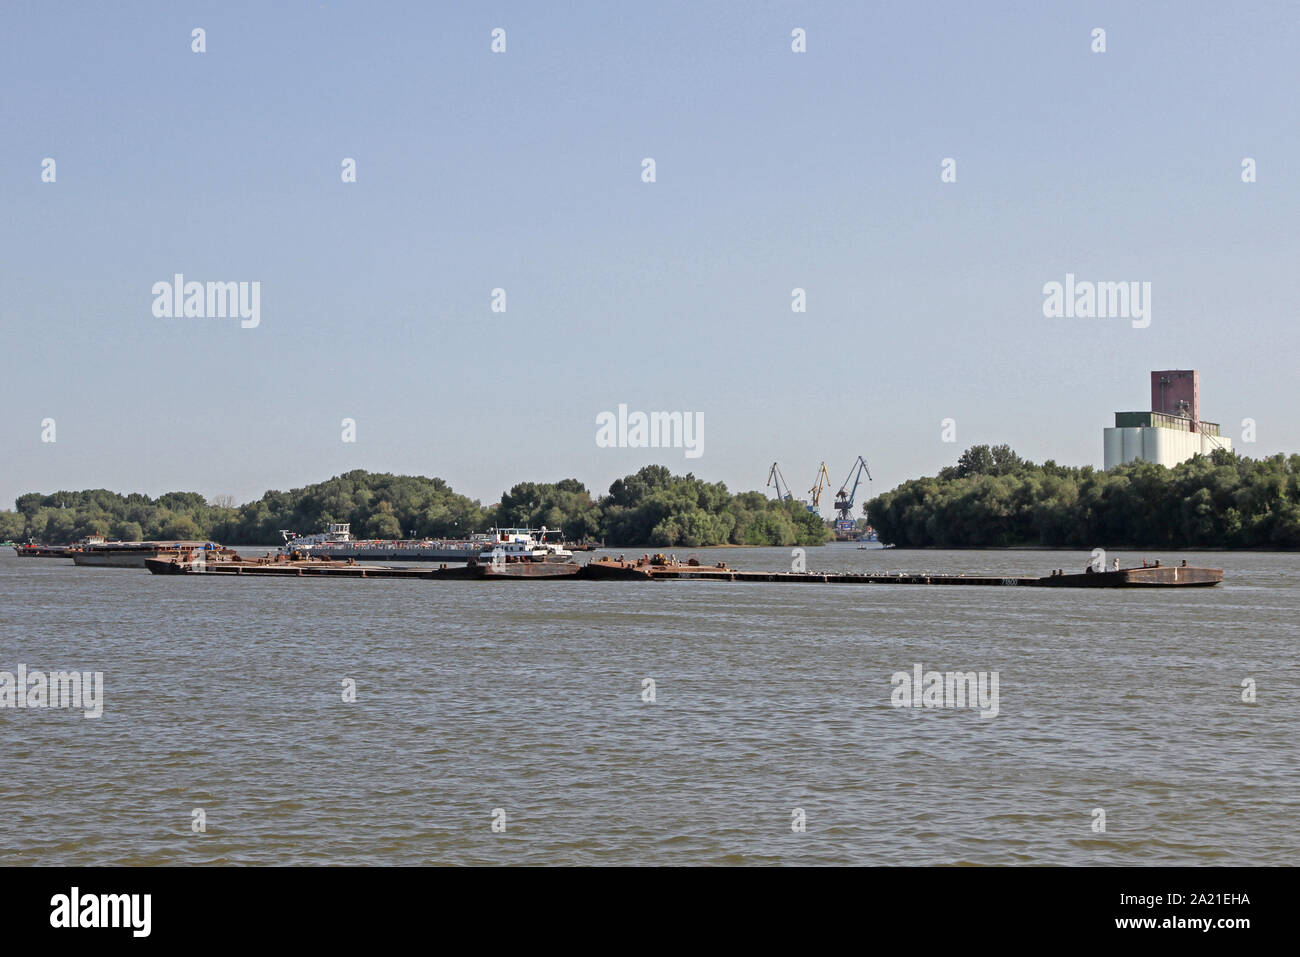 View of tanker on Danube River near Belgrade with trees on shore with grain silos and the Port of Belgrade behind it, Danube River, Serbia. Stock Photo